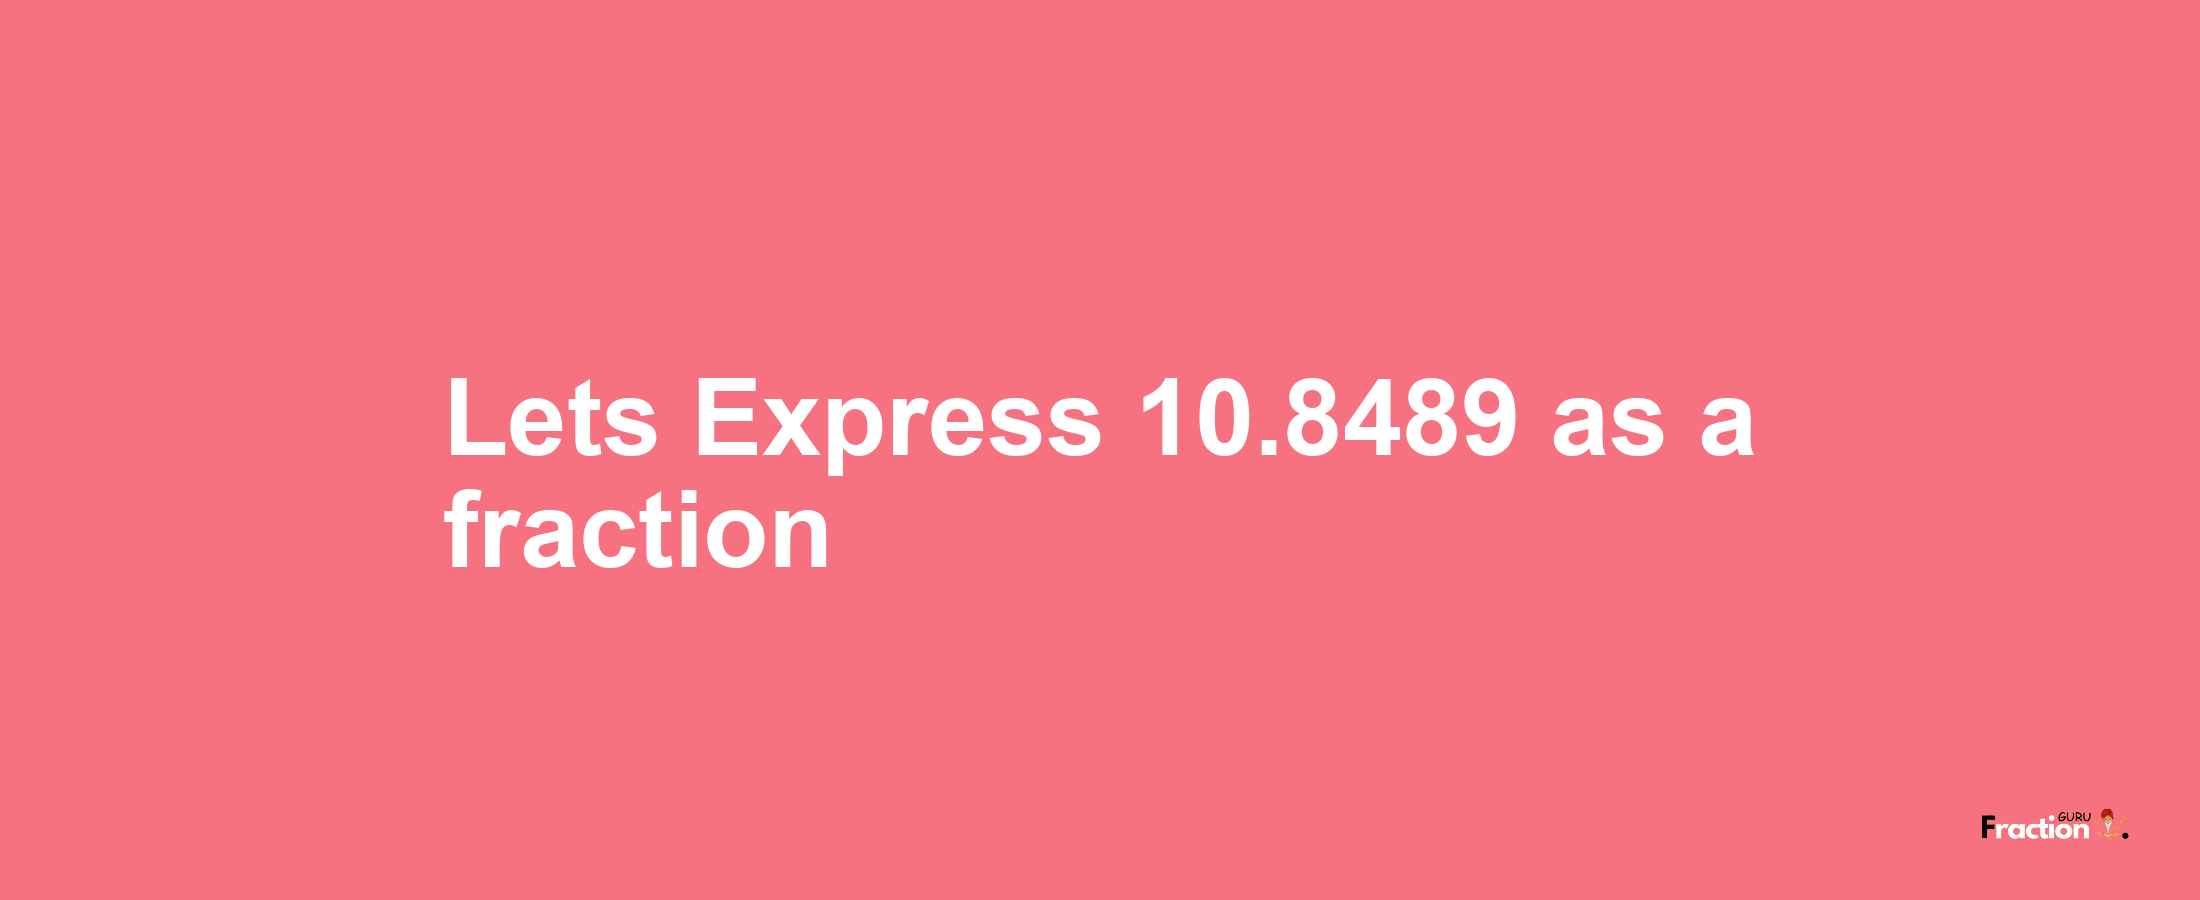 Lets Express 10.8489 as afraction